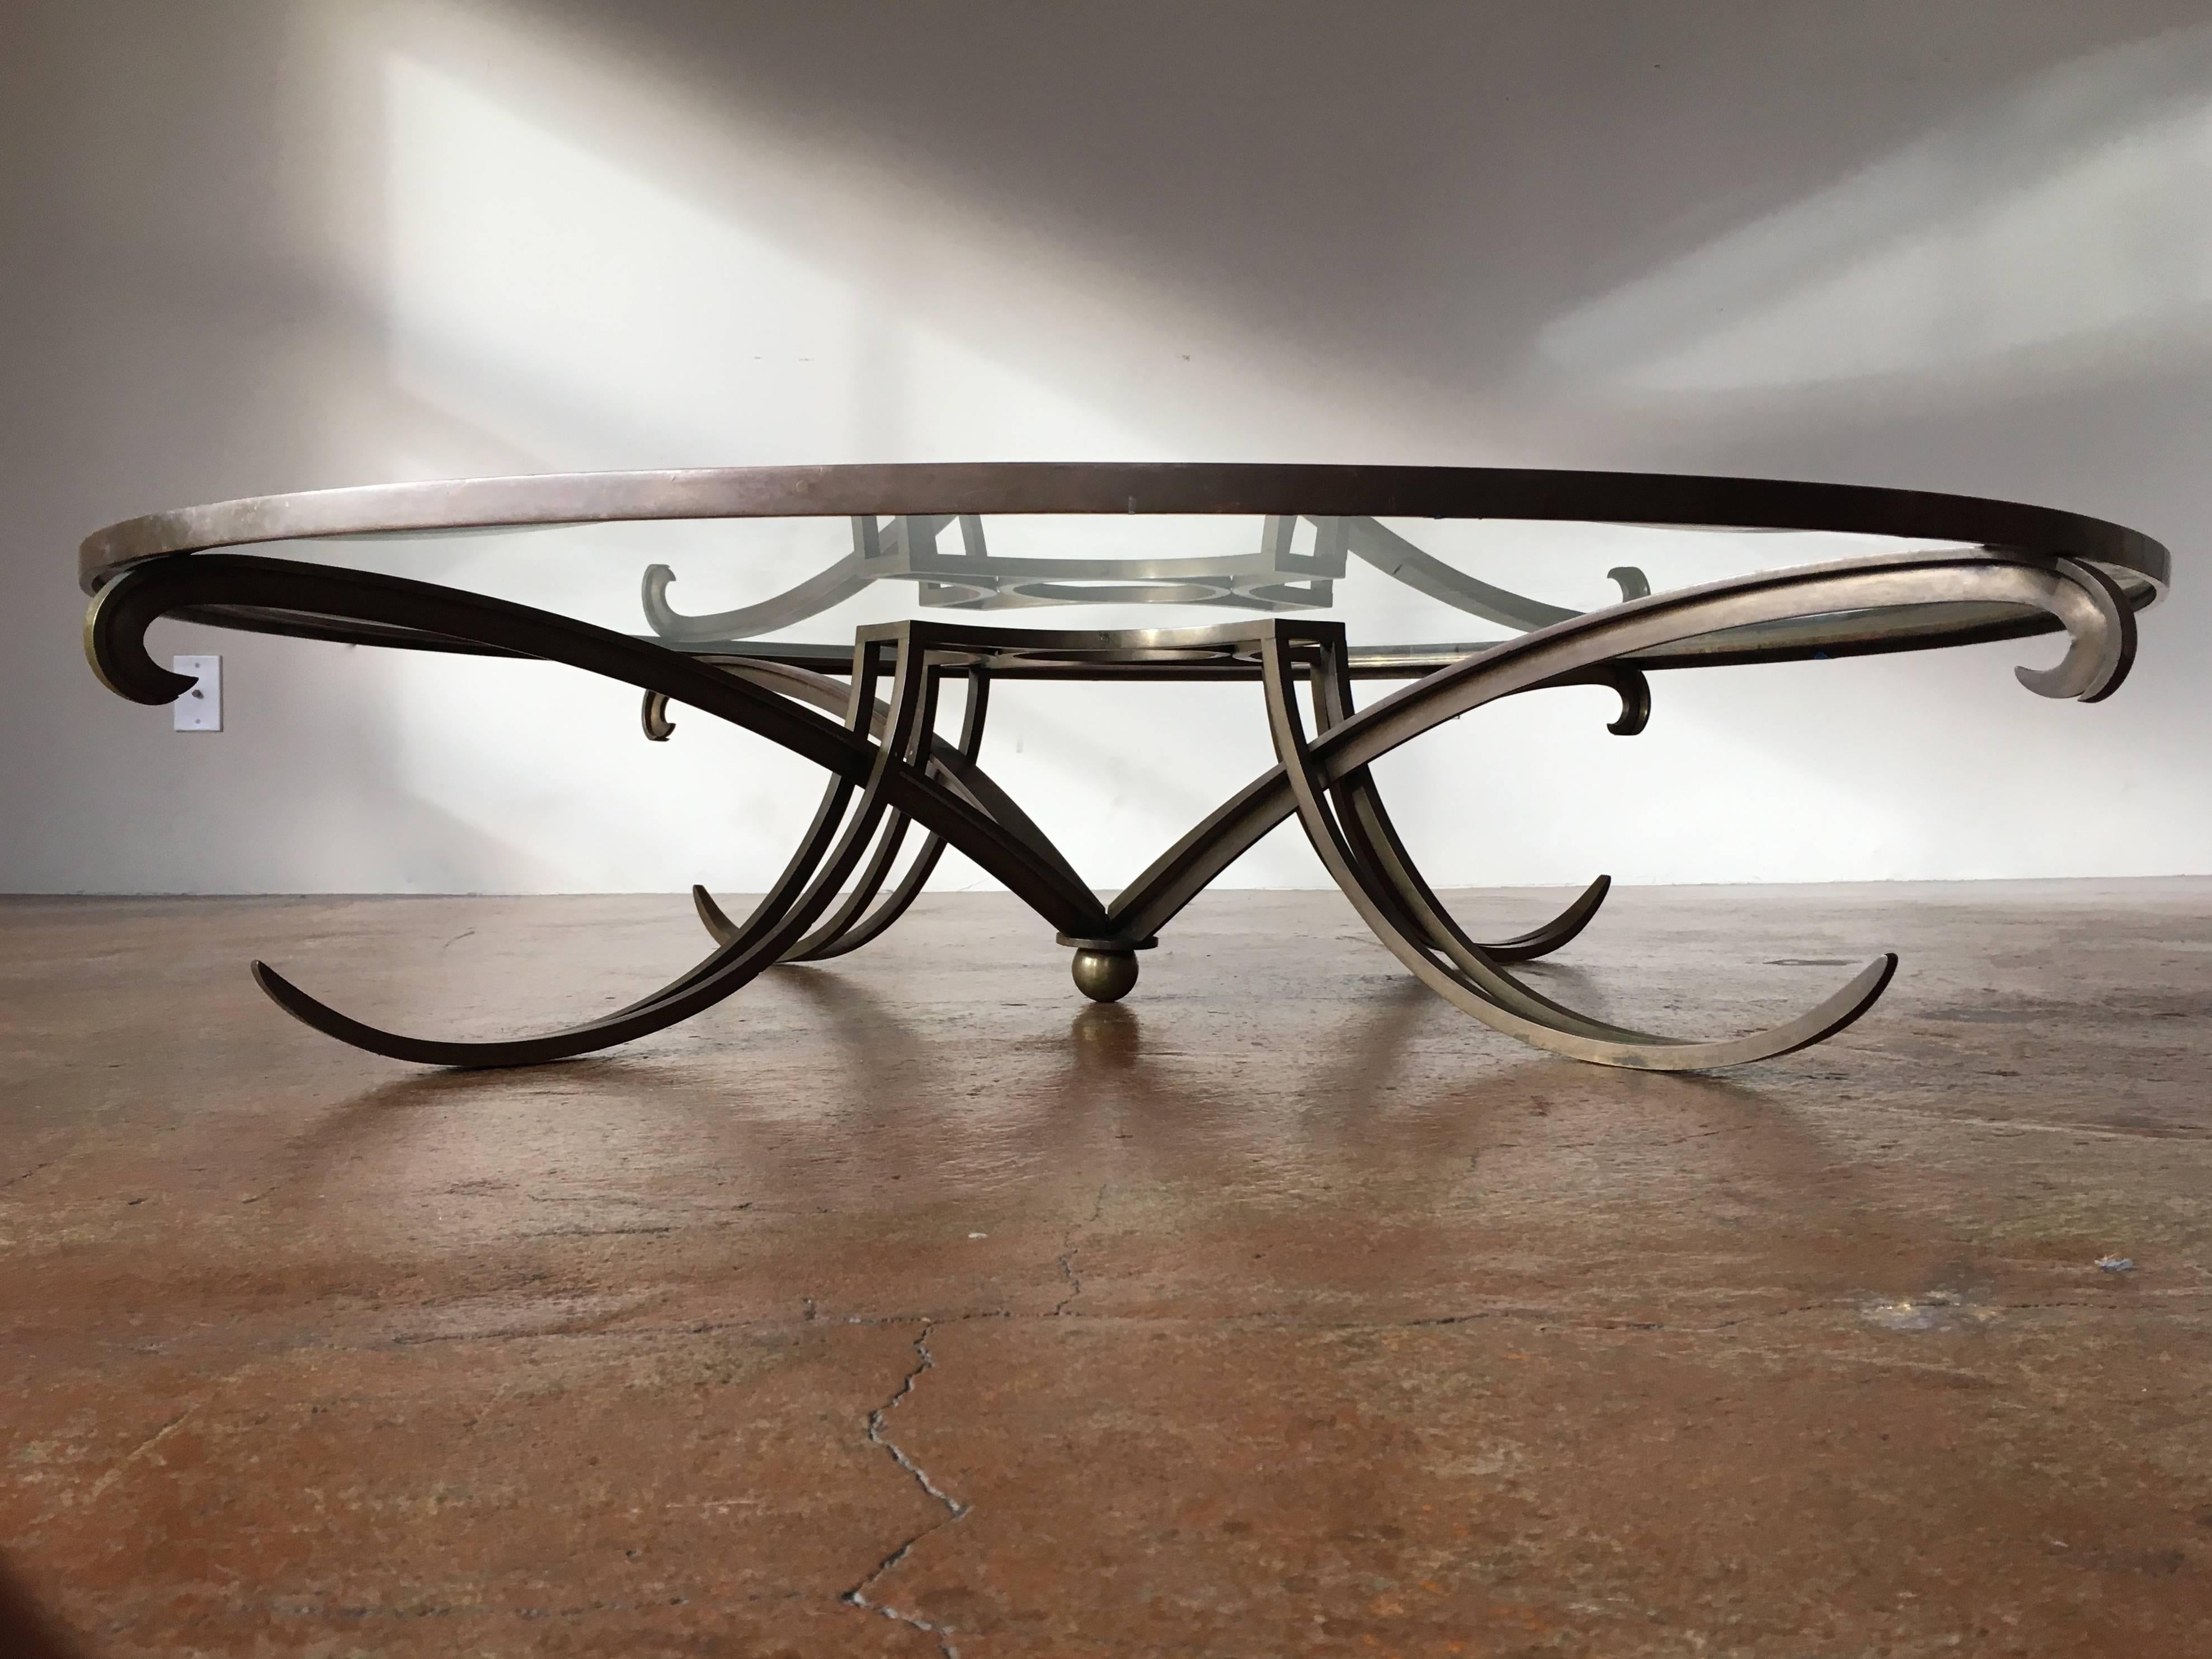 Mid-20th Century Stunning Arturo Pani, Solid Brass Sculptural Coffee Table, Mexico City, 1950